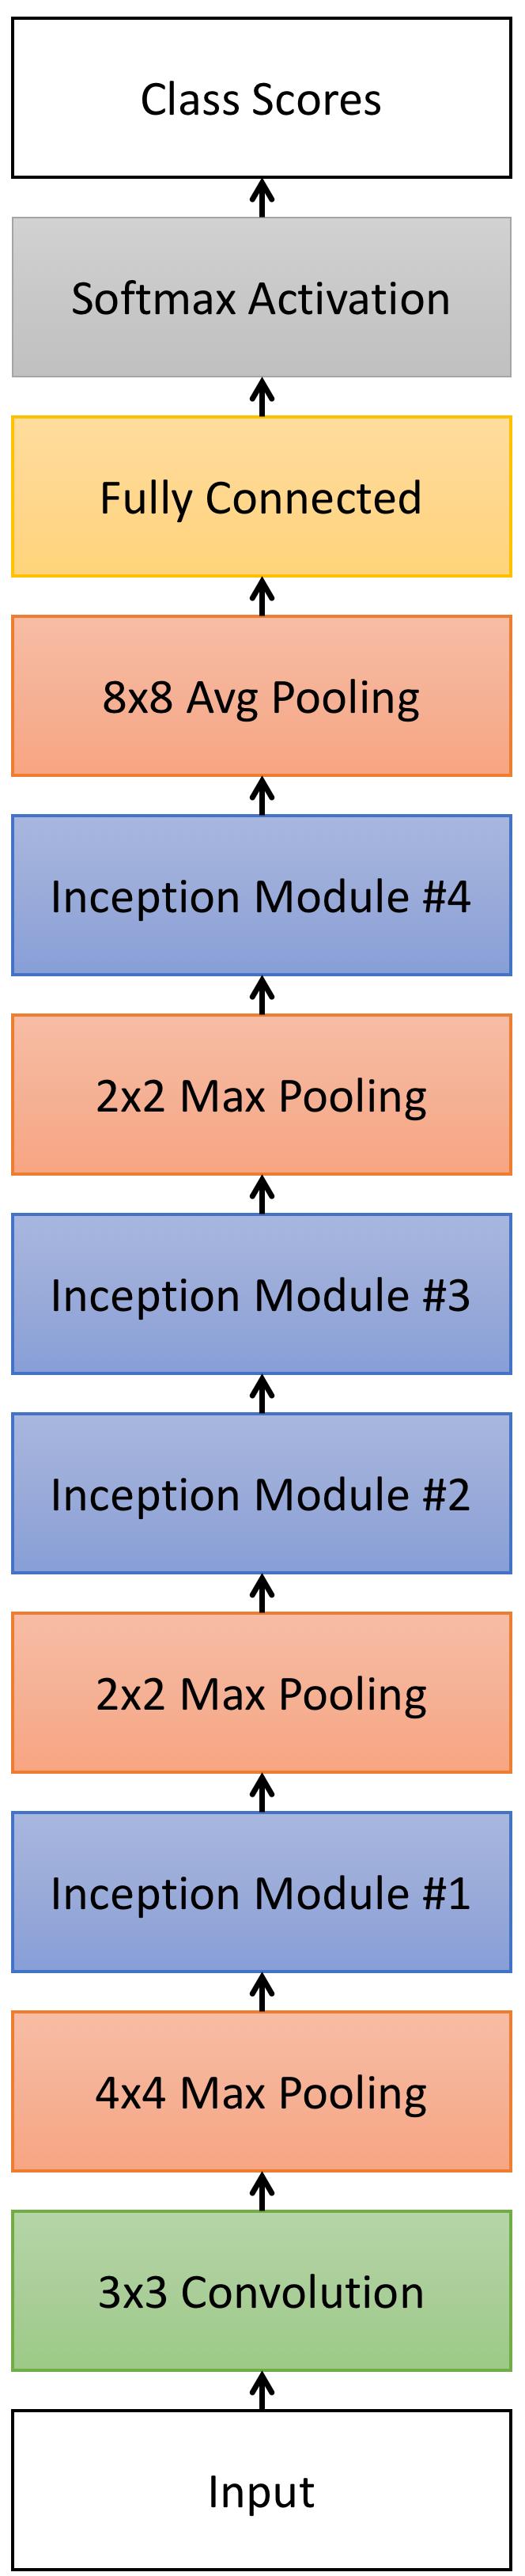 Furthermore, our inception modules involved some dimensionality reduction in order to reduce the complexity of the model and the computational costs: The 3 3 and 5 5 convolutional layers are